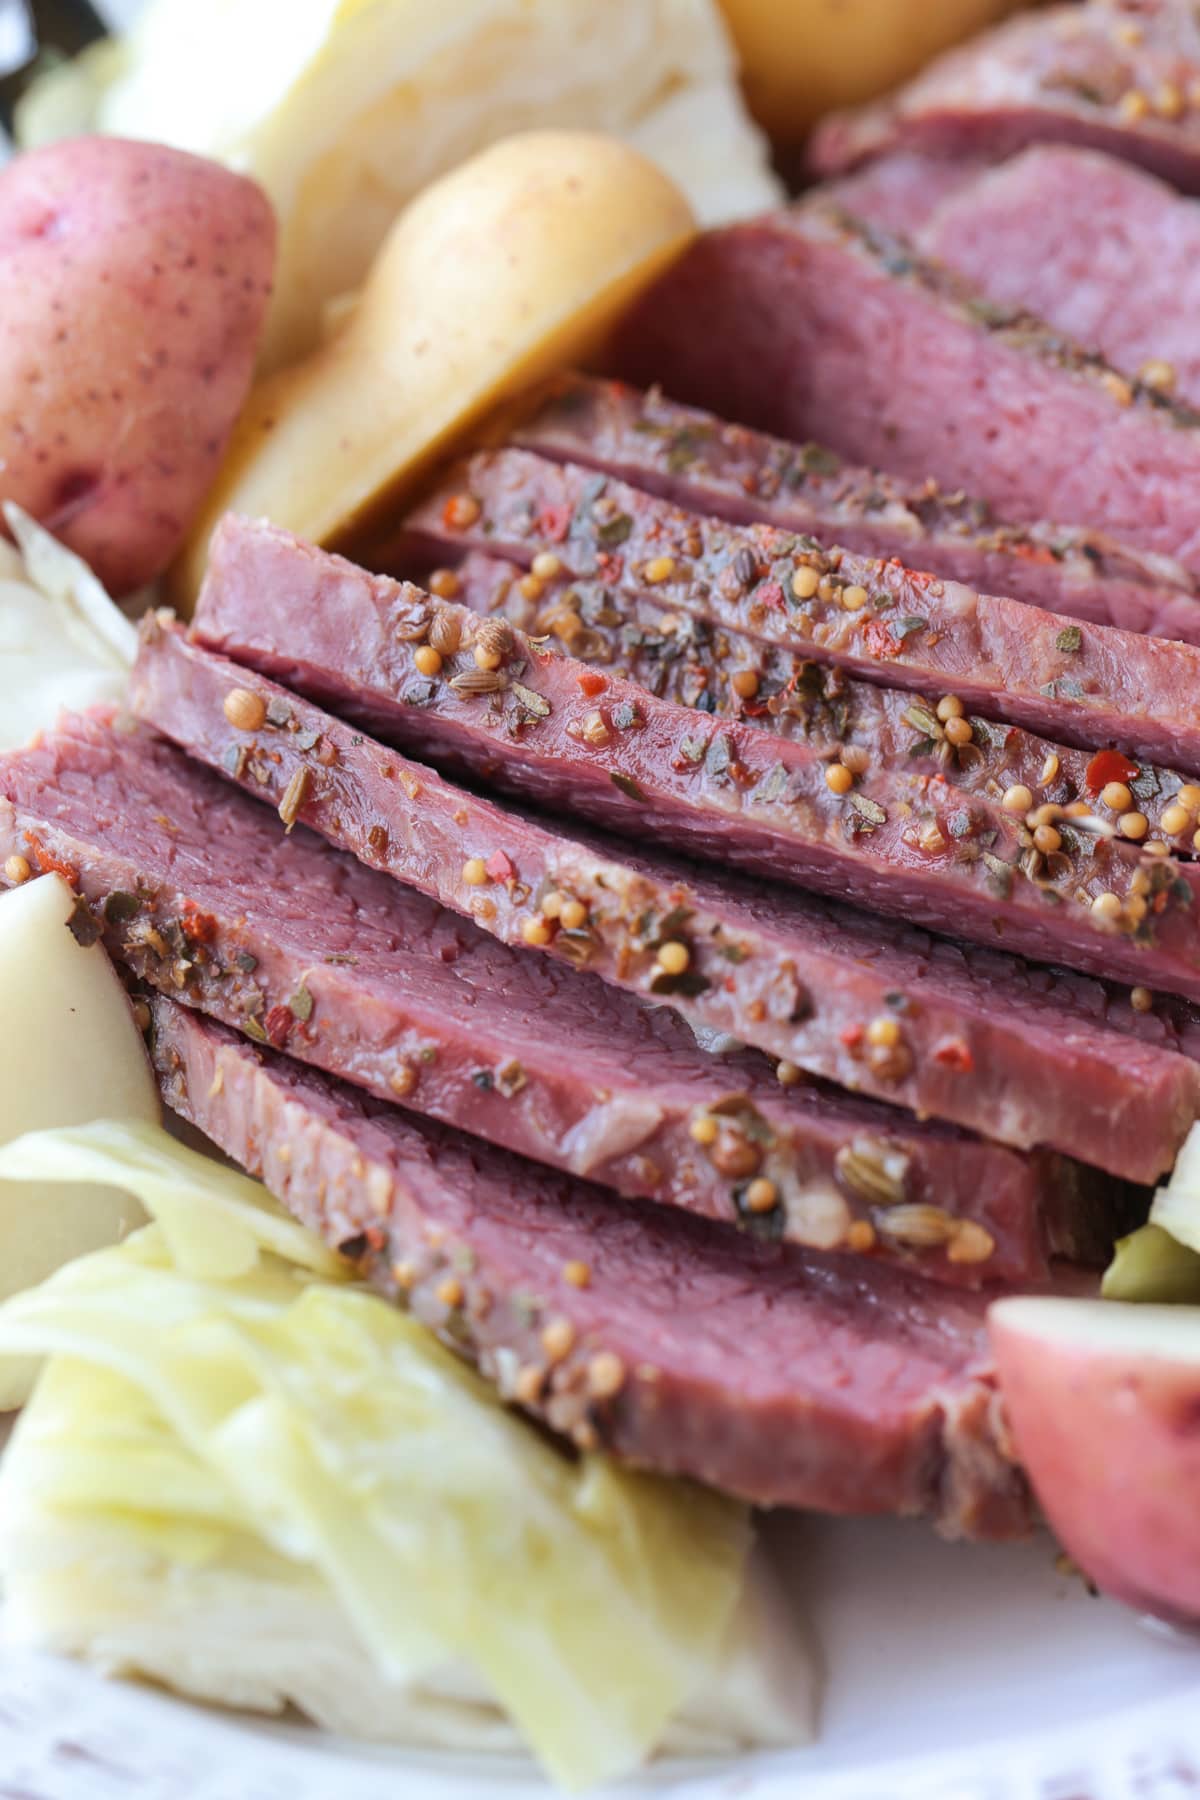 sliced corned beef and cabbage on platter close up